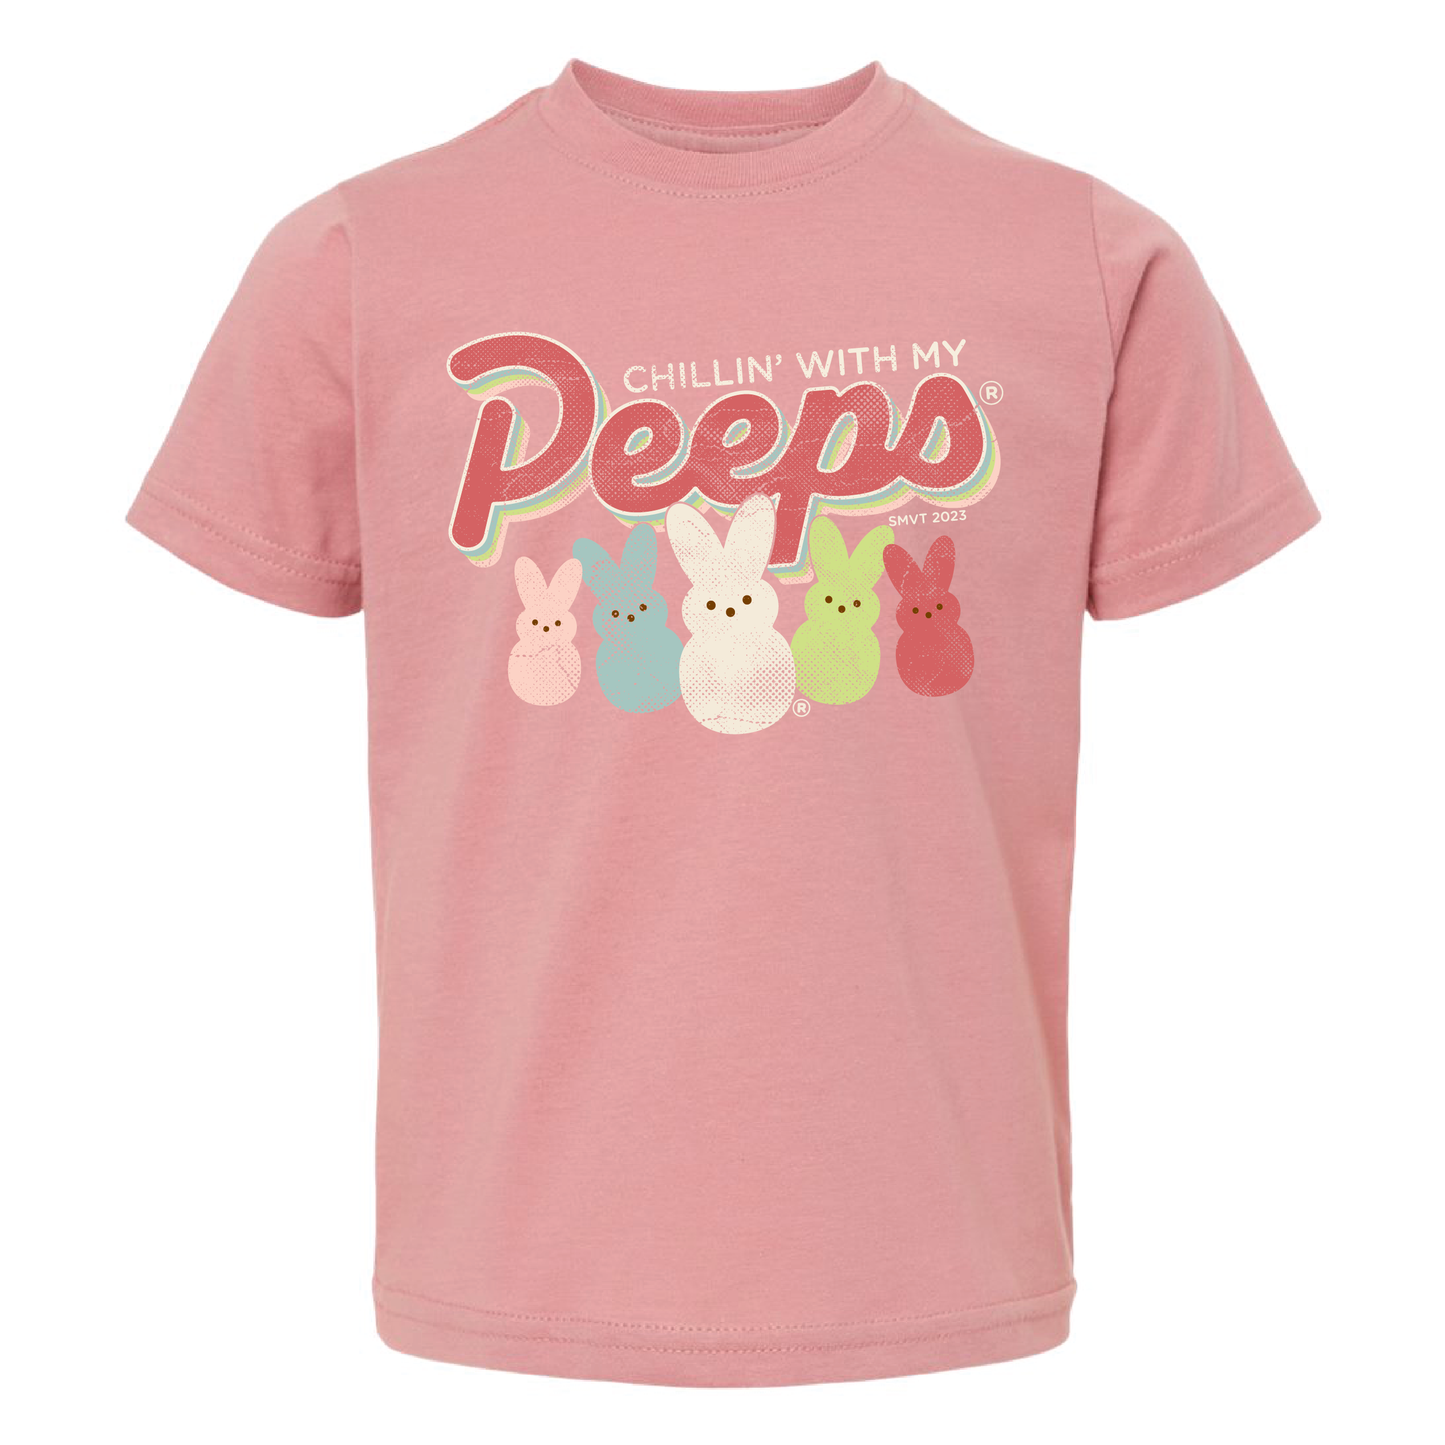 Toddler Chillin' With My Peeps Graphic Tee